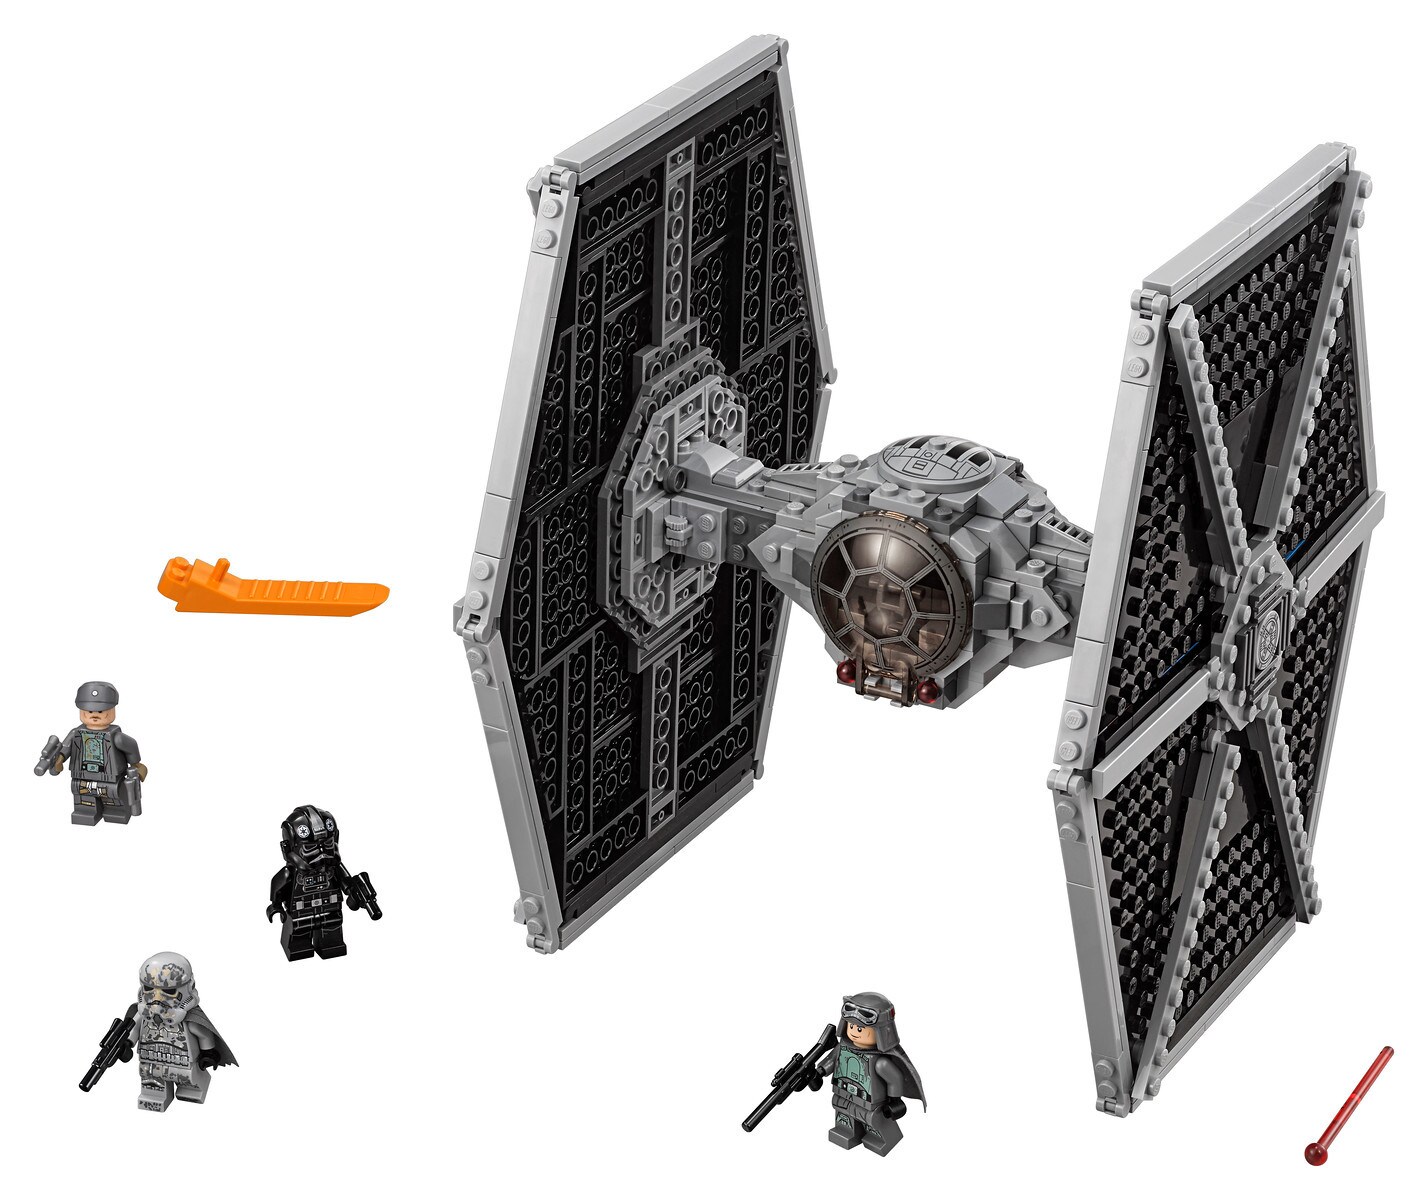 A LEGO TIE fighter and LEGO figurines.